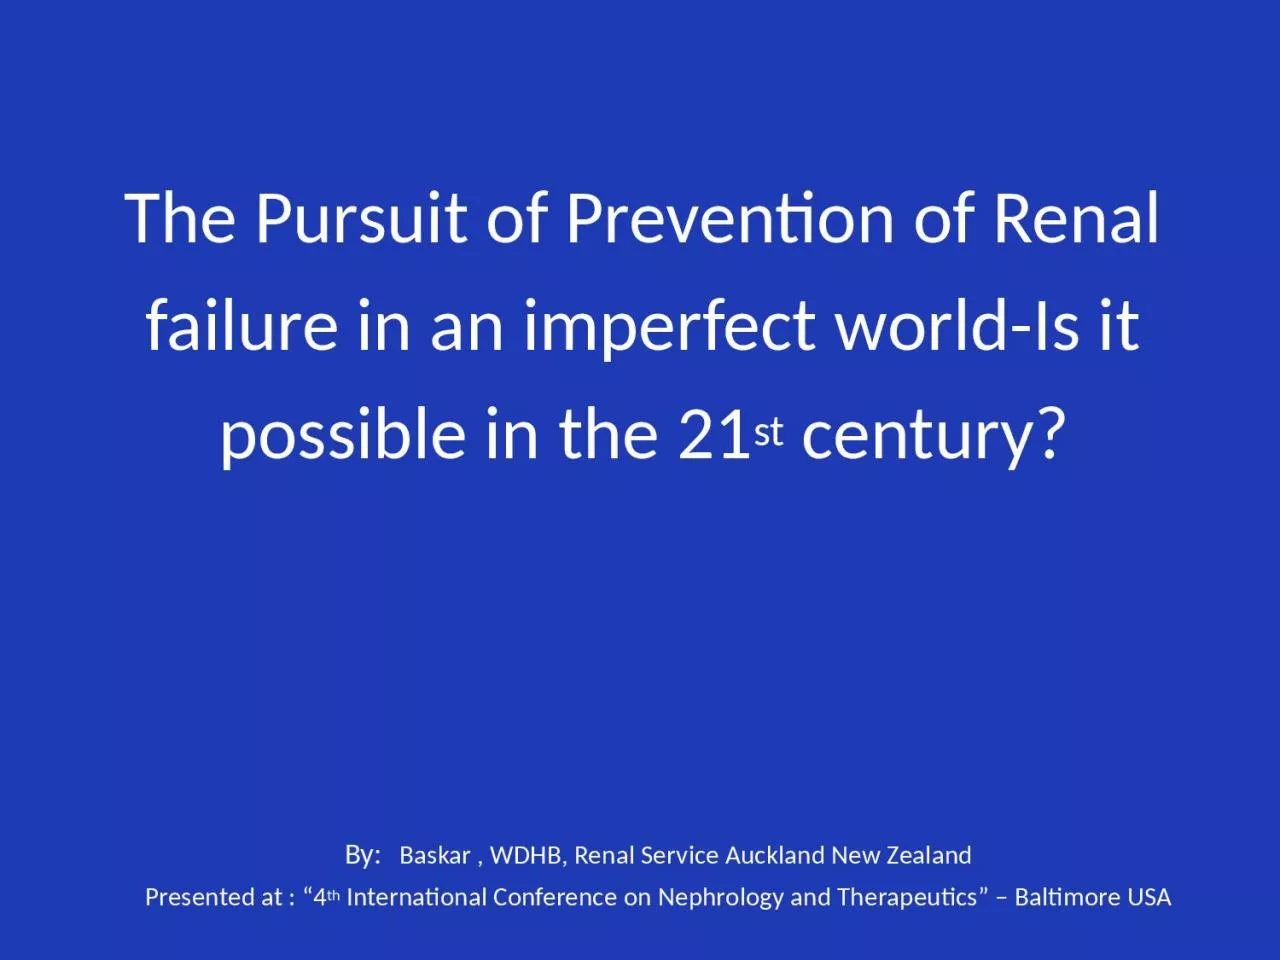 The Pursuit of Prevention of Renal failure in an imperfect world-Is it possible in the